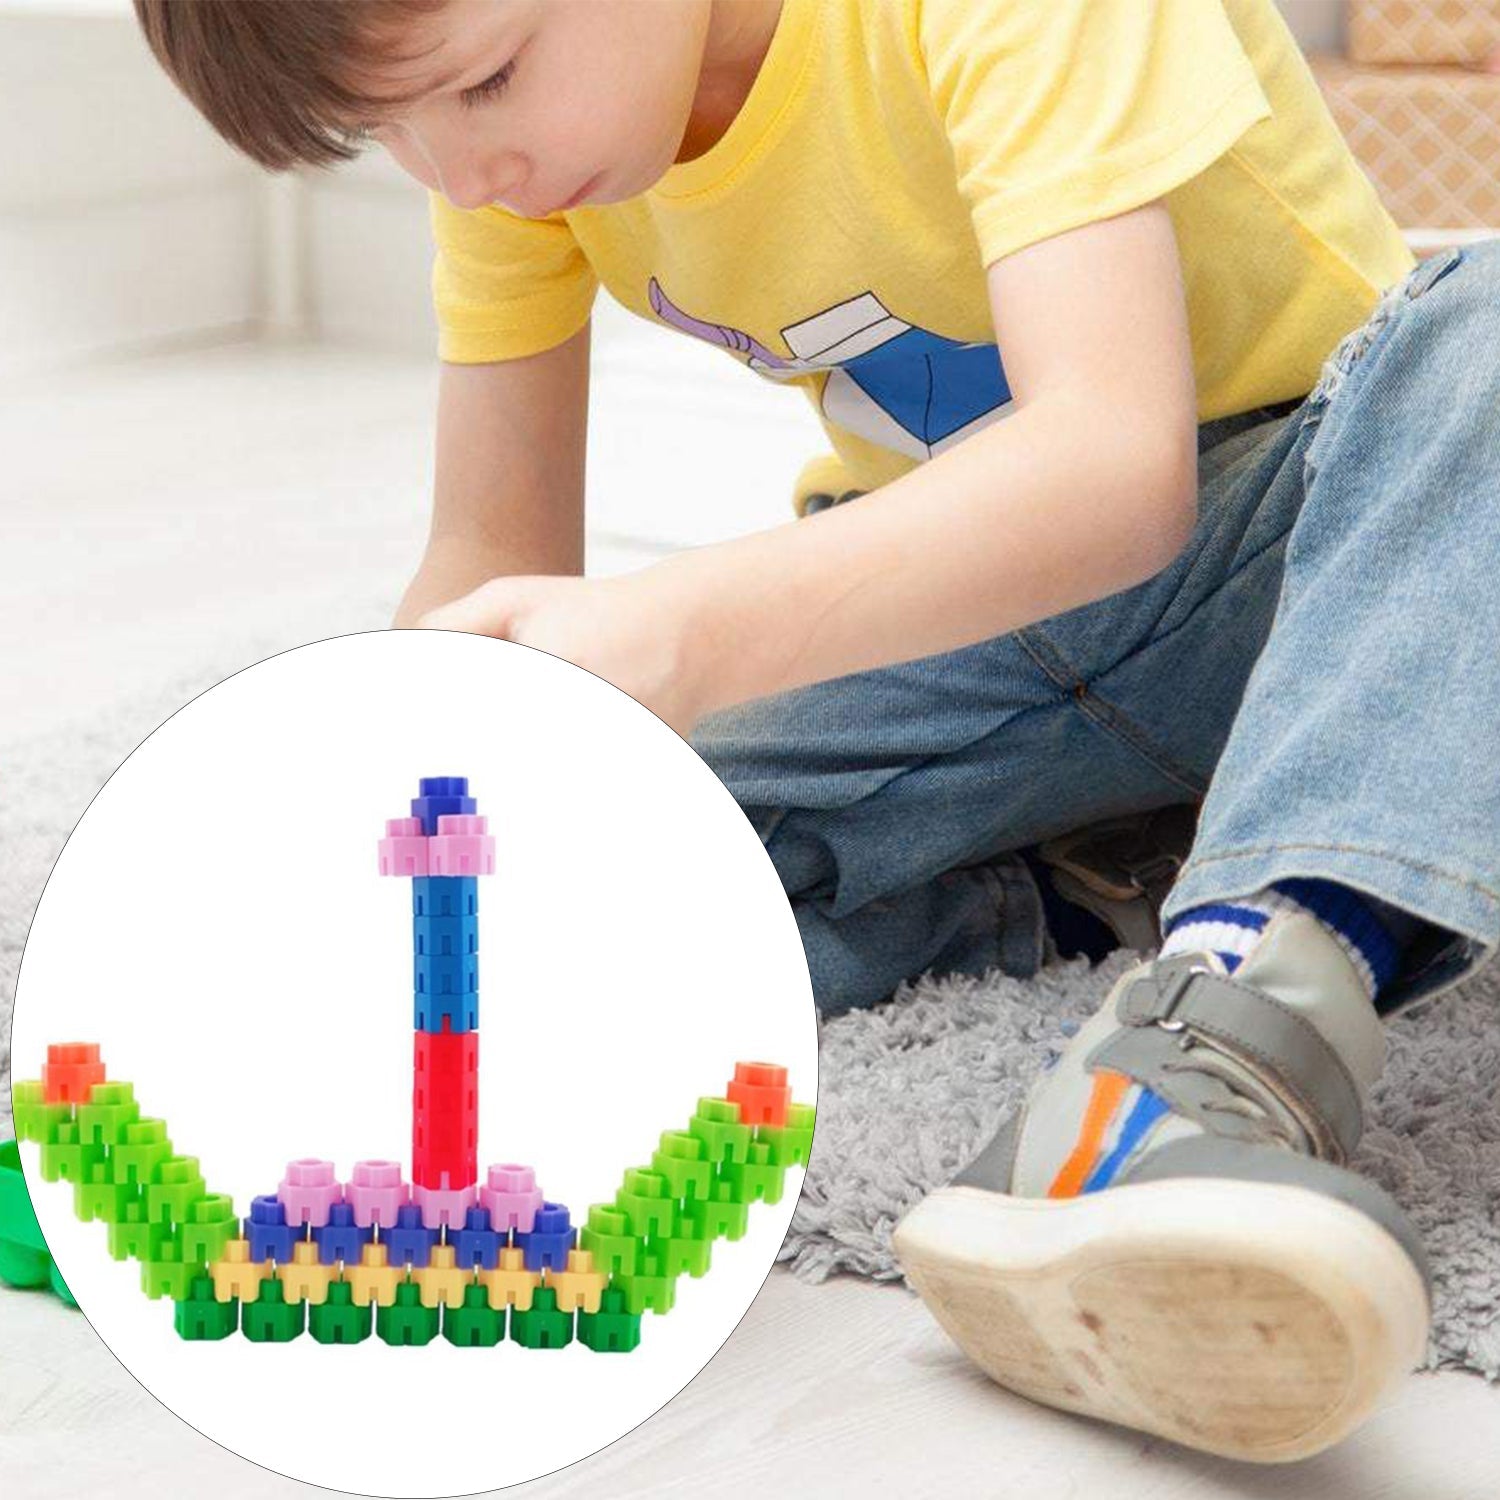 3908 120 Pc Hexa Blocks Toy used in all kinds of household and official places specially for kids and children for their playing and enjoying purposes. DeoDap